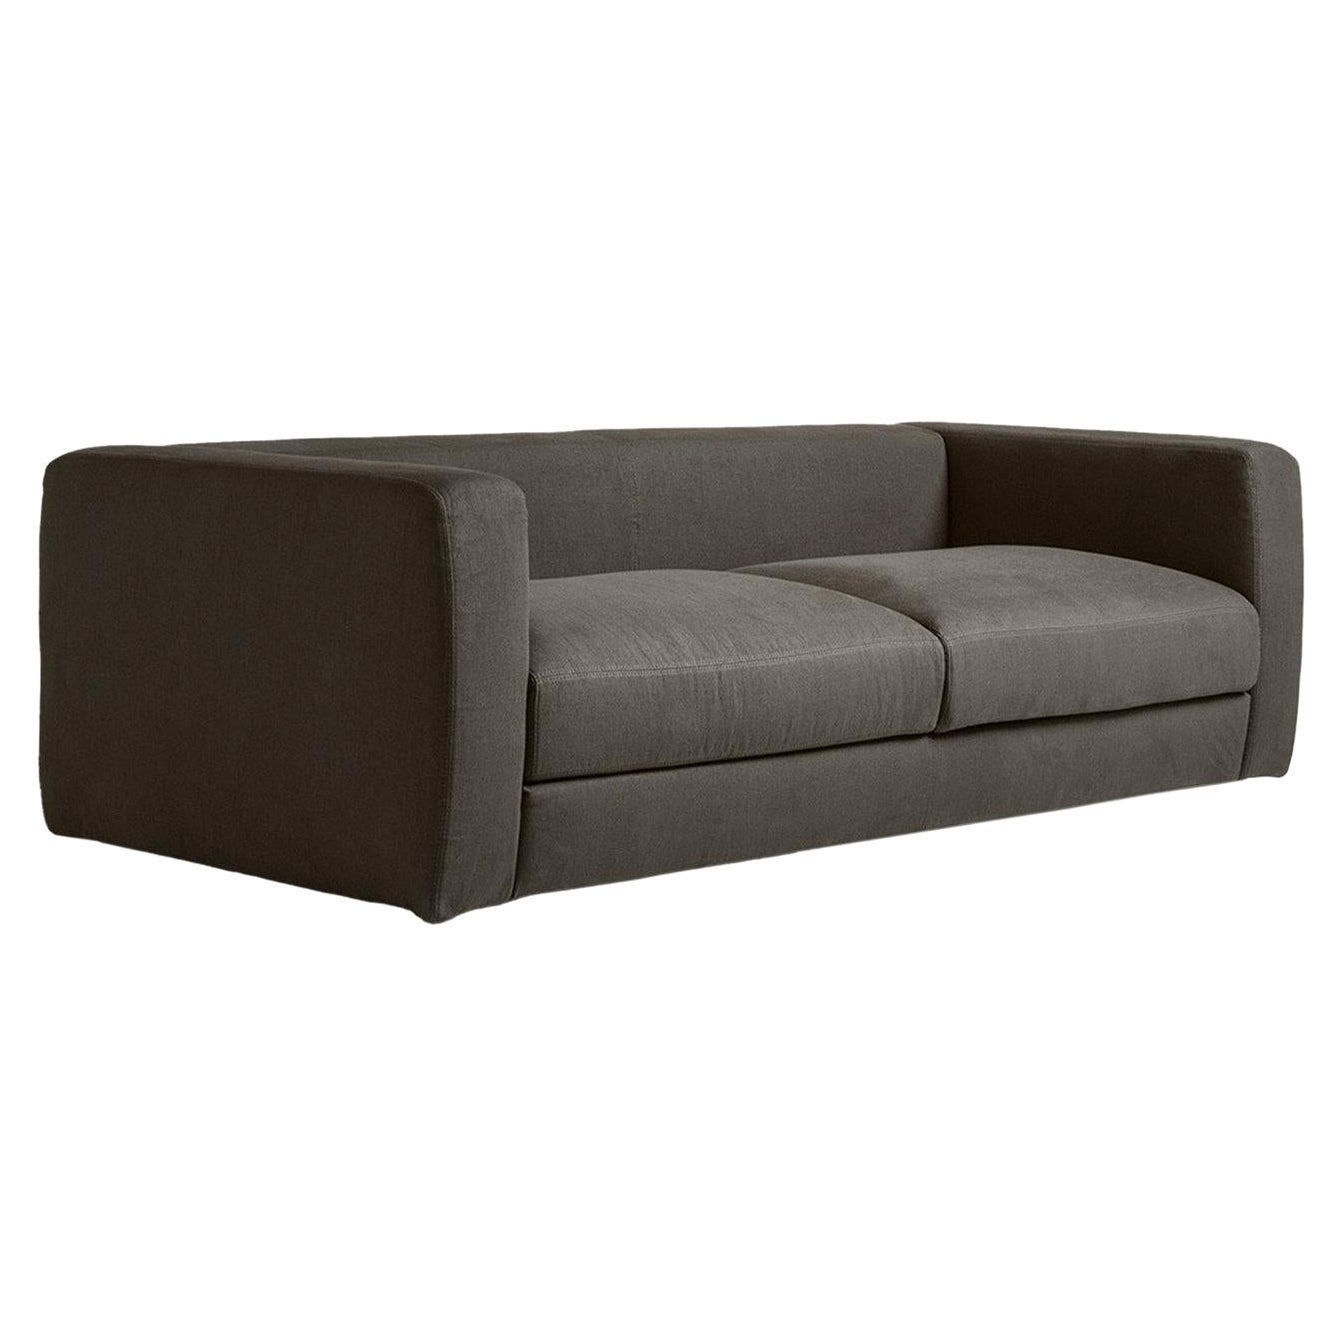 Softly One Gray Sofa by Enrico Cesana For Sale